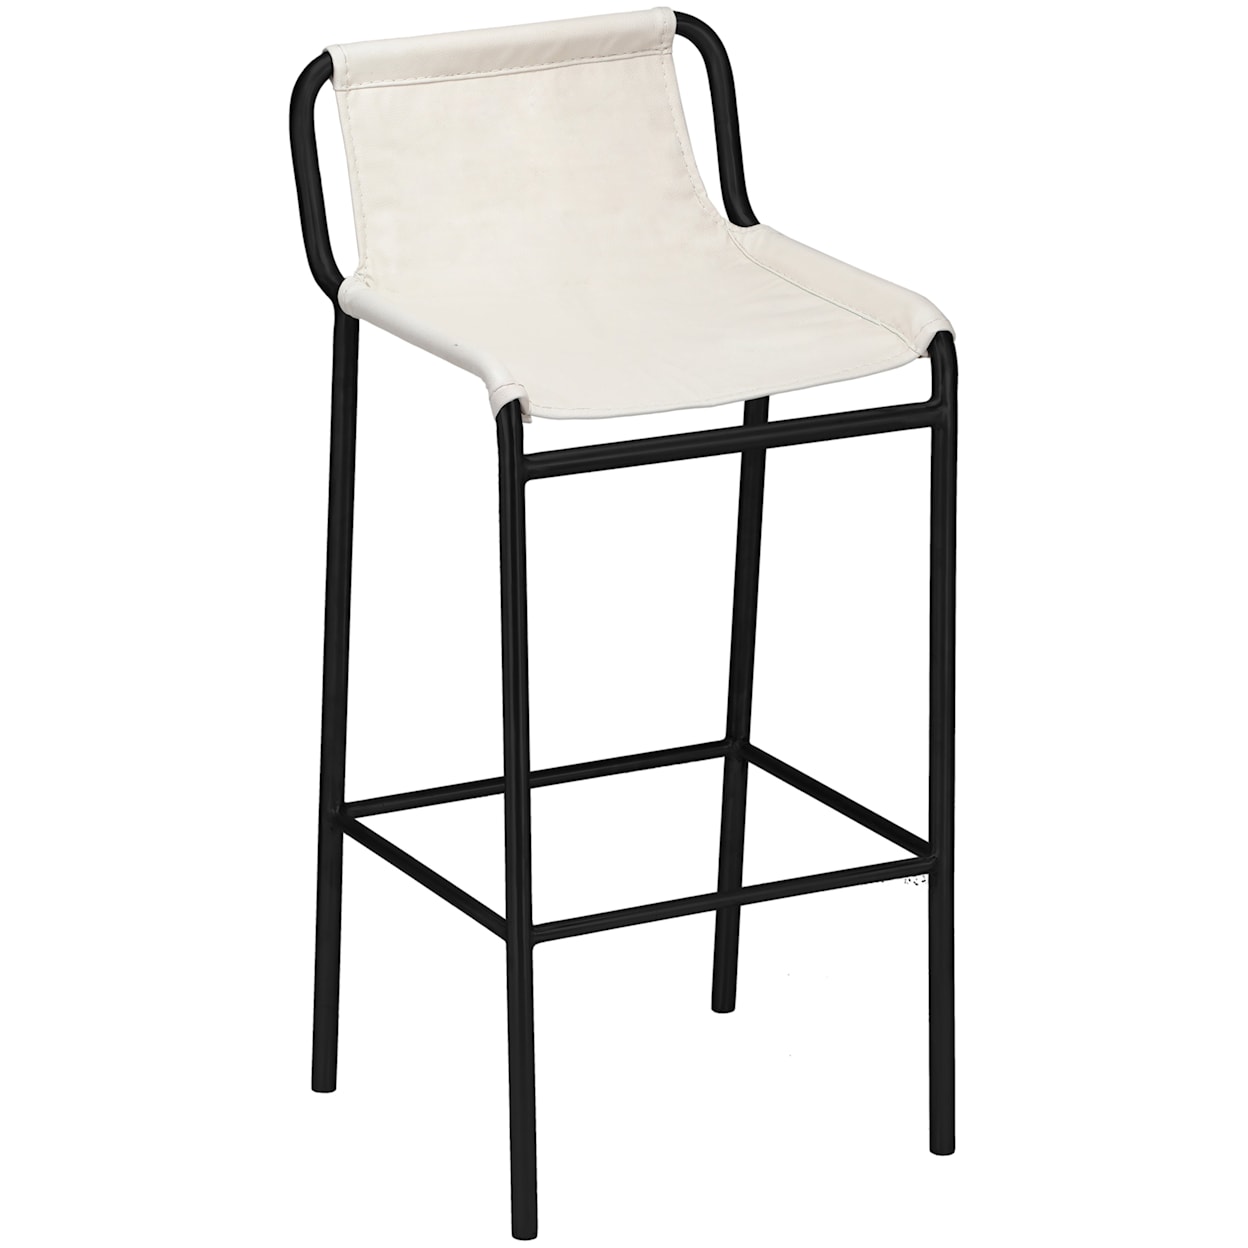 Meridian Furniture Dax Cream Faux Leather Counter Stool